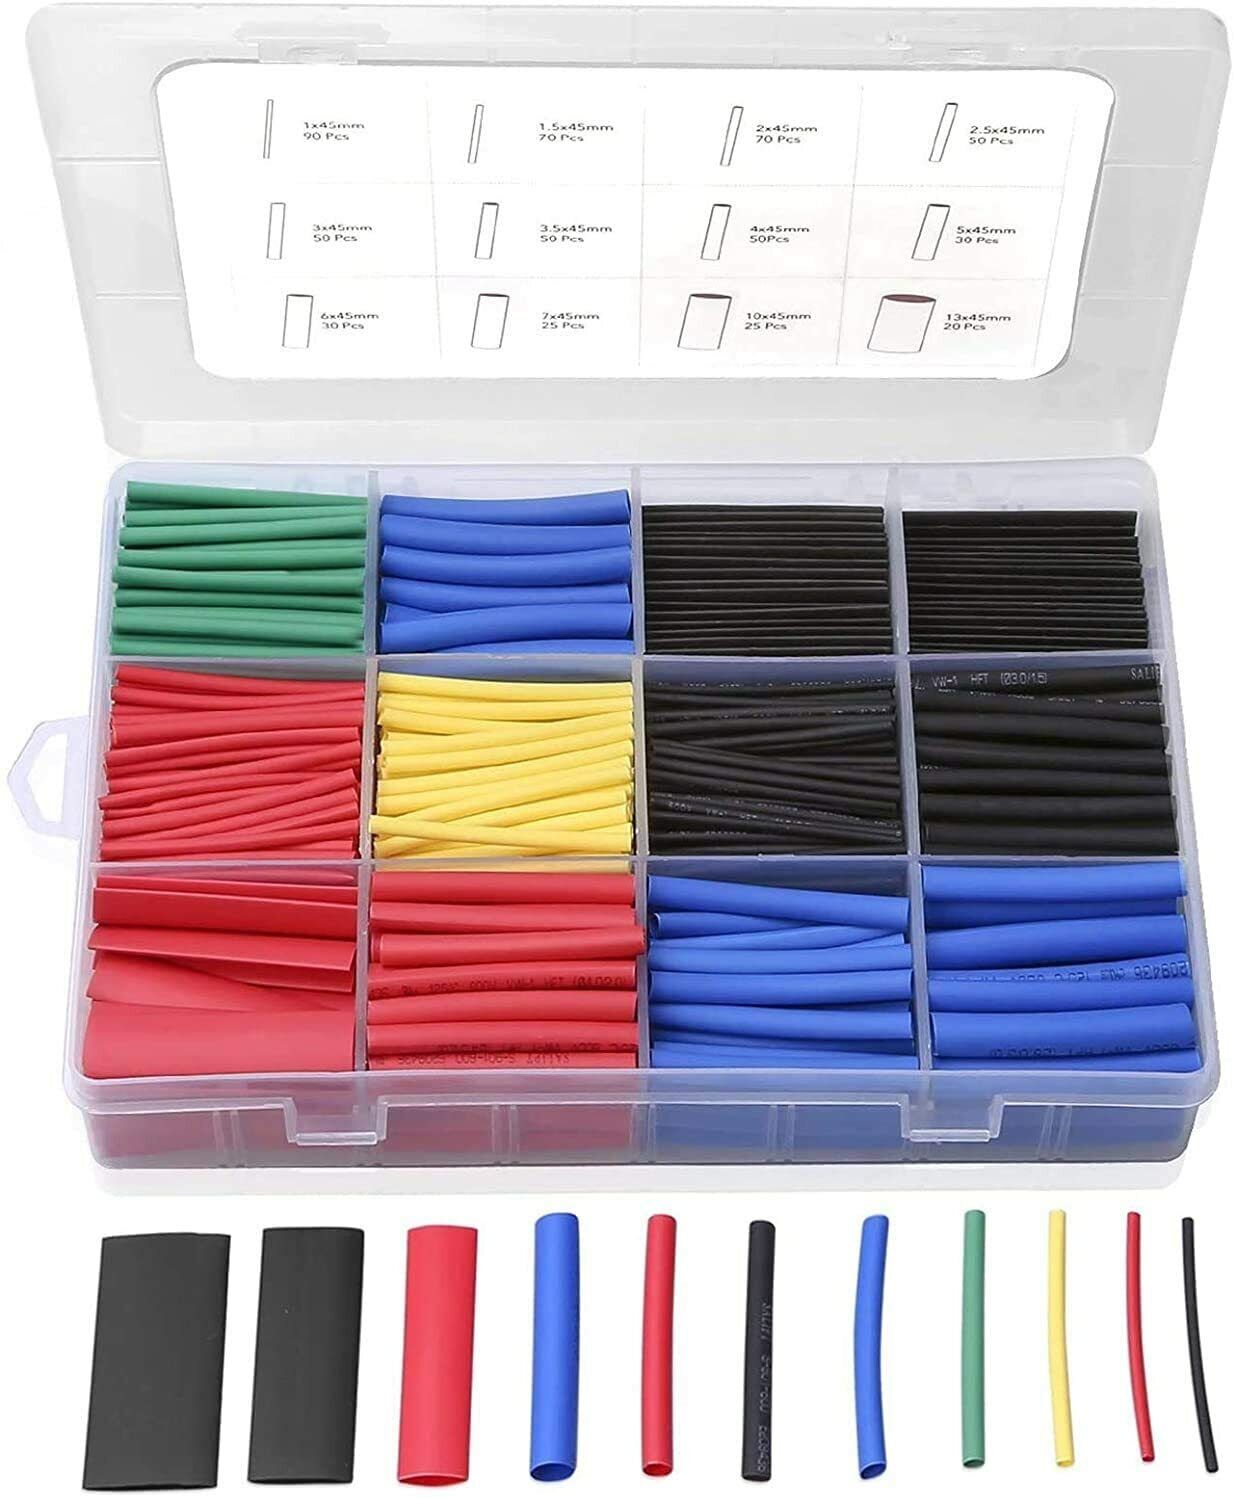 560 PCS. 2:1 HEAT SHRINK TUBING TUBE SLEEVING WRAP CABLE WIRE 5 COLORS 12 SIZES